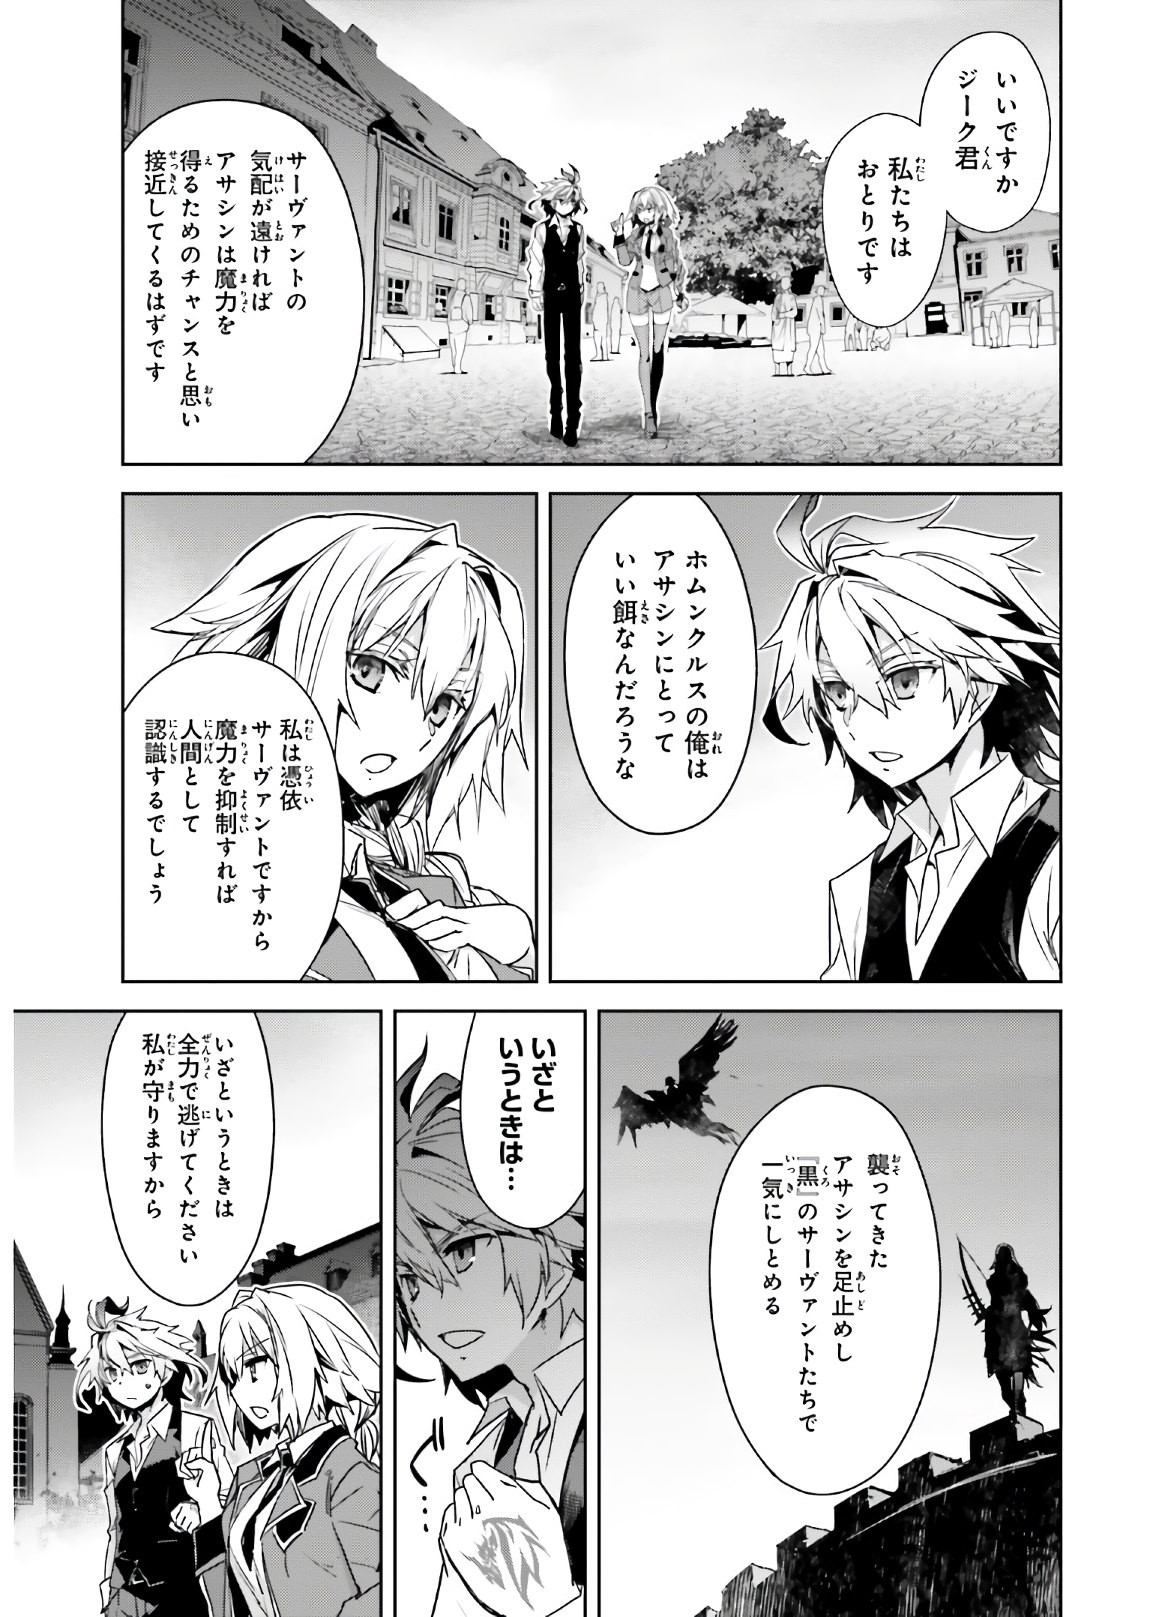 Fate-Apocrypha - Chapter 46 - Page 3